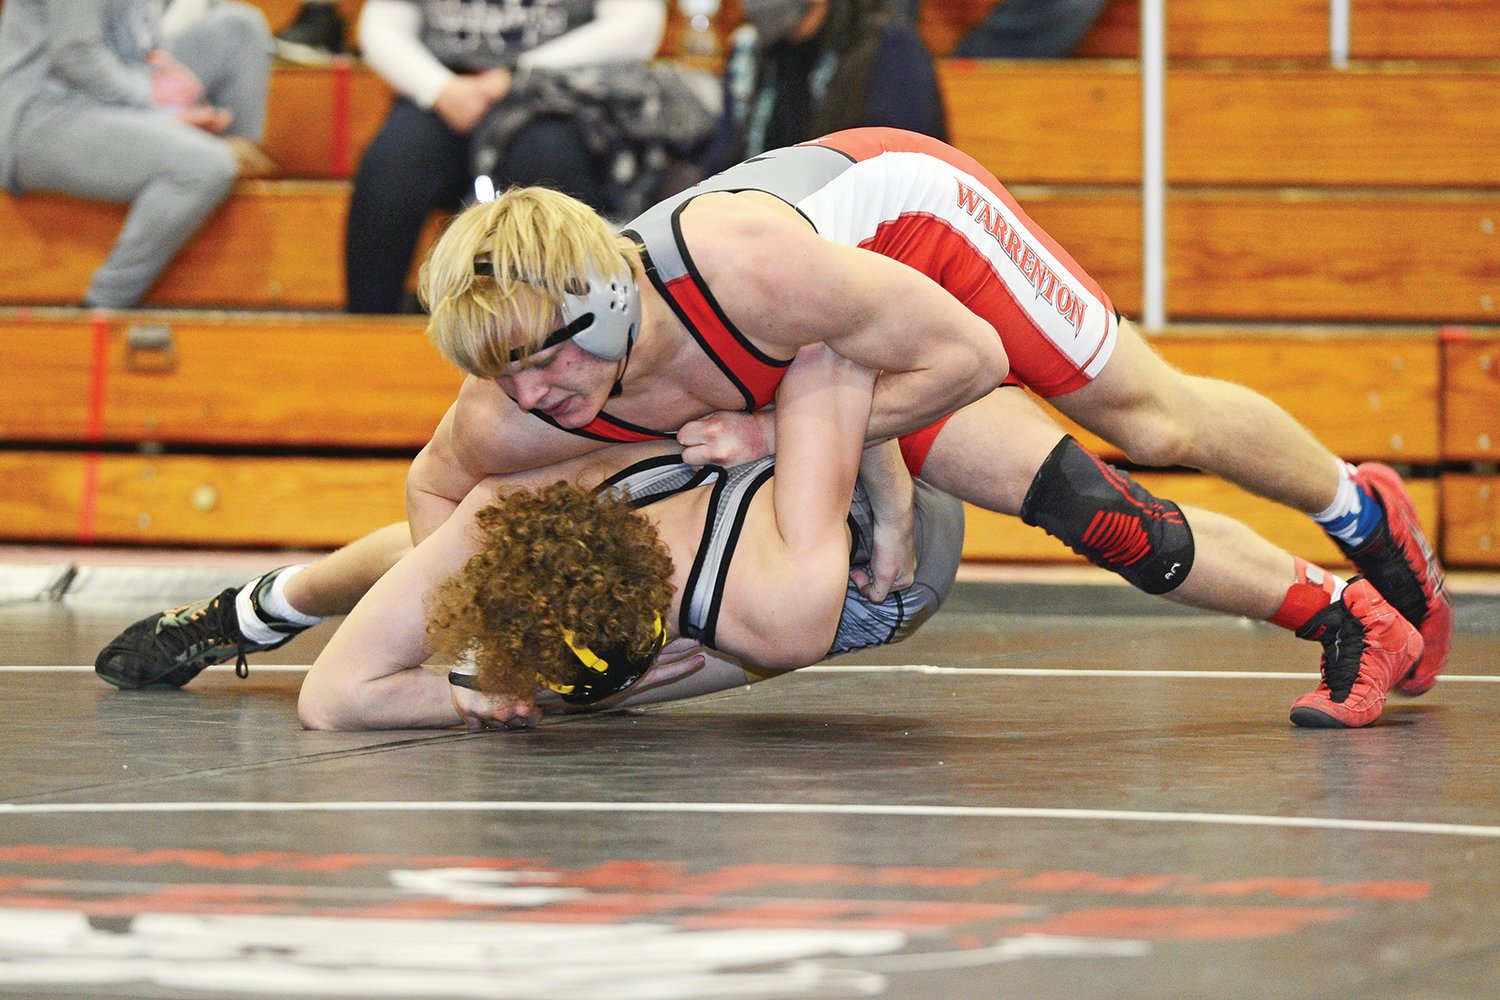 SECTIONAL BOUND — Warrenton’s Levi Penrod got a second place finish at the Class 3, District 4 Tournament, qualifying for sectionals along with six of his teammates.      Bill Barrett photo.